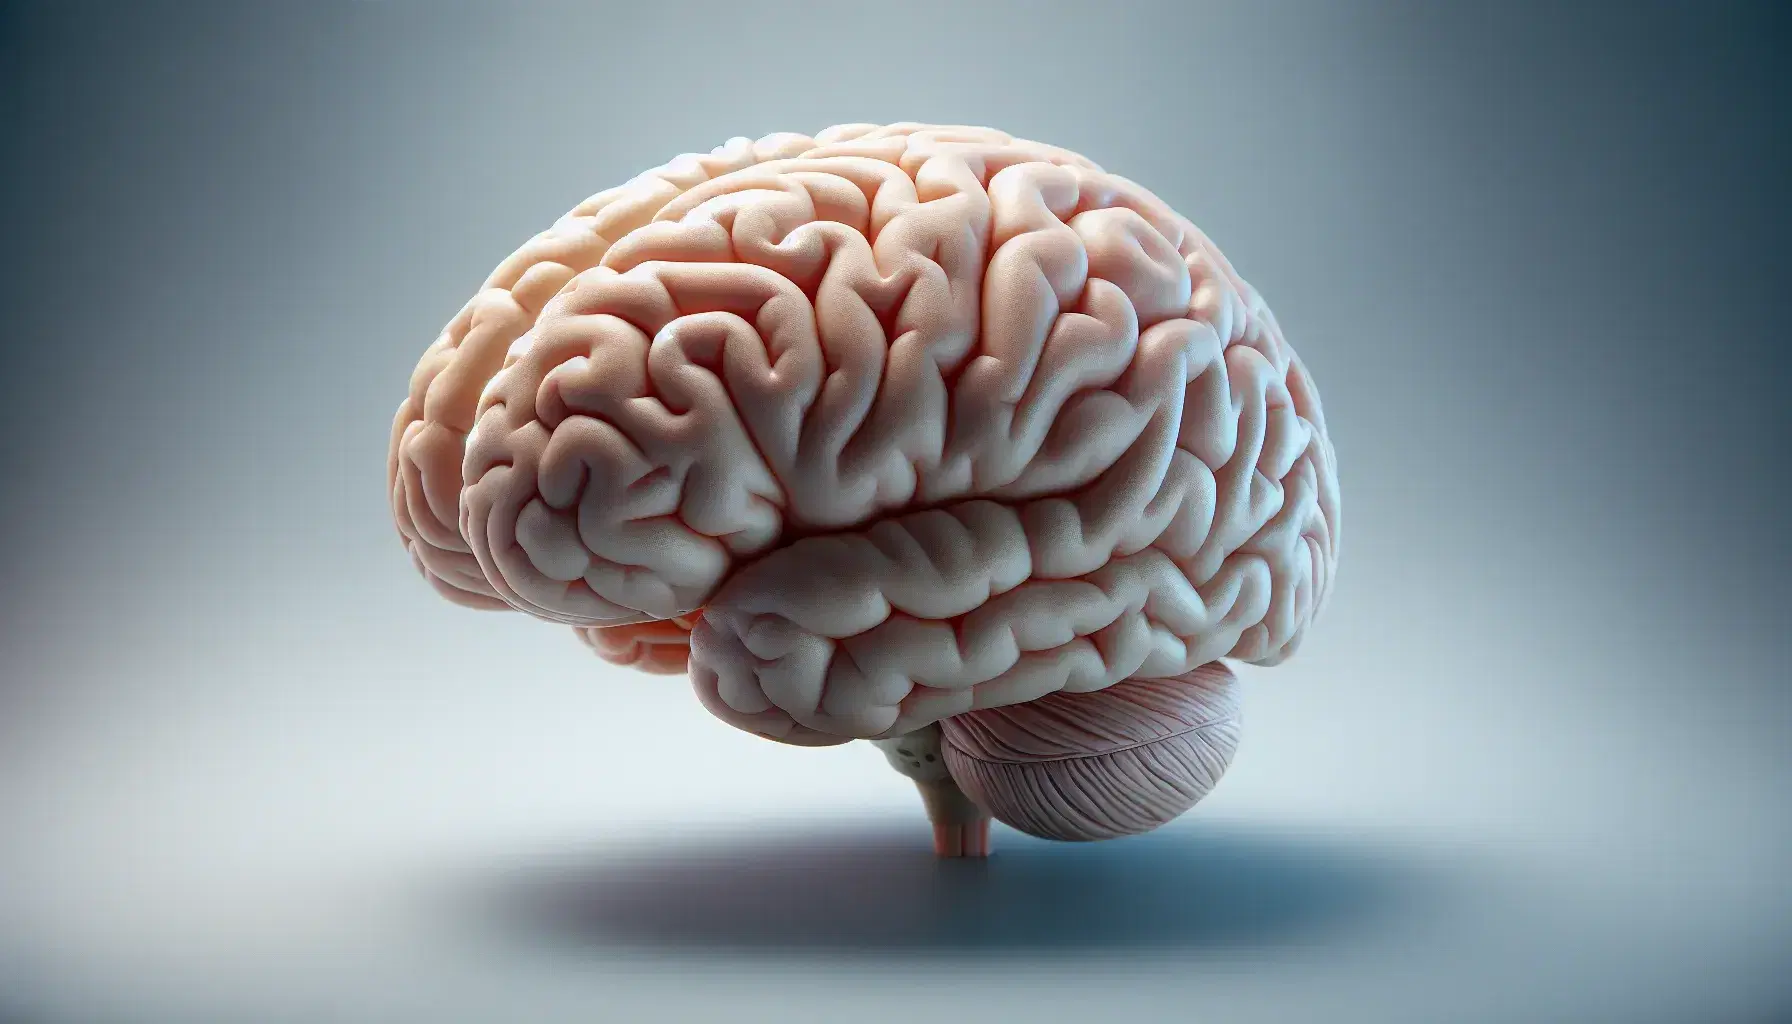 Detailed anatomical model of the human brain with hemispheres in shades of pink, sulci and gyrus visible on a neutral gray background.